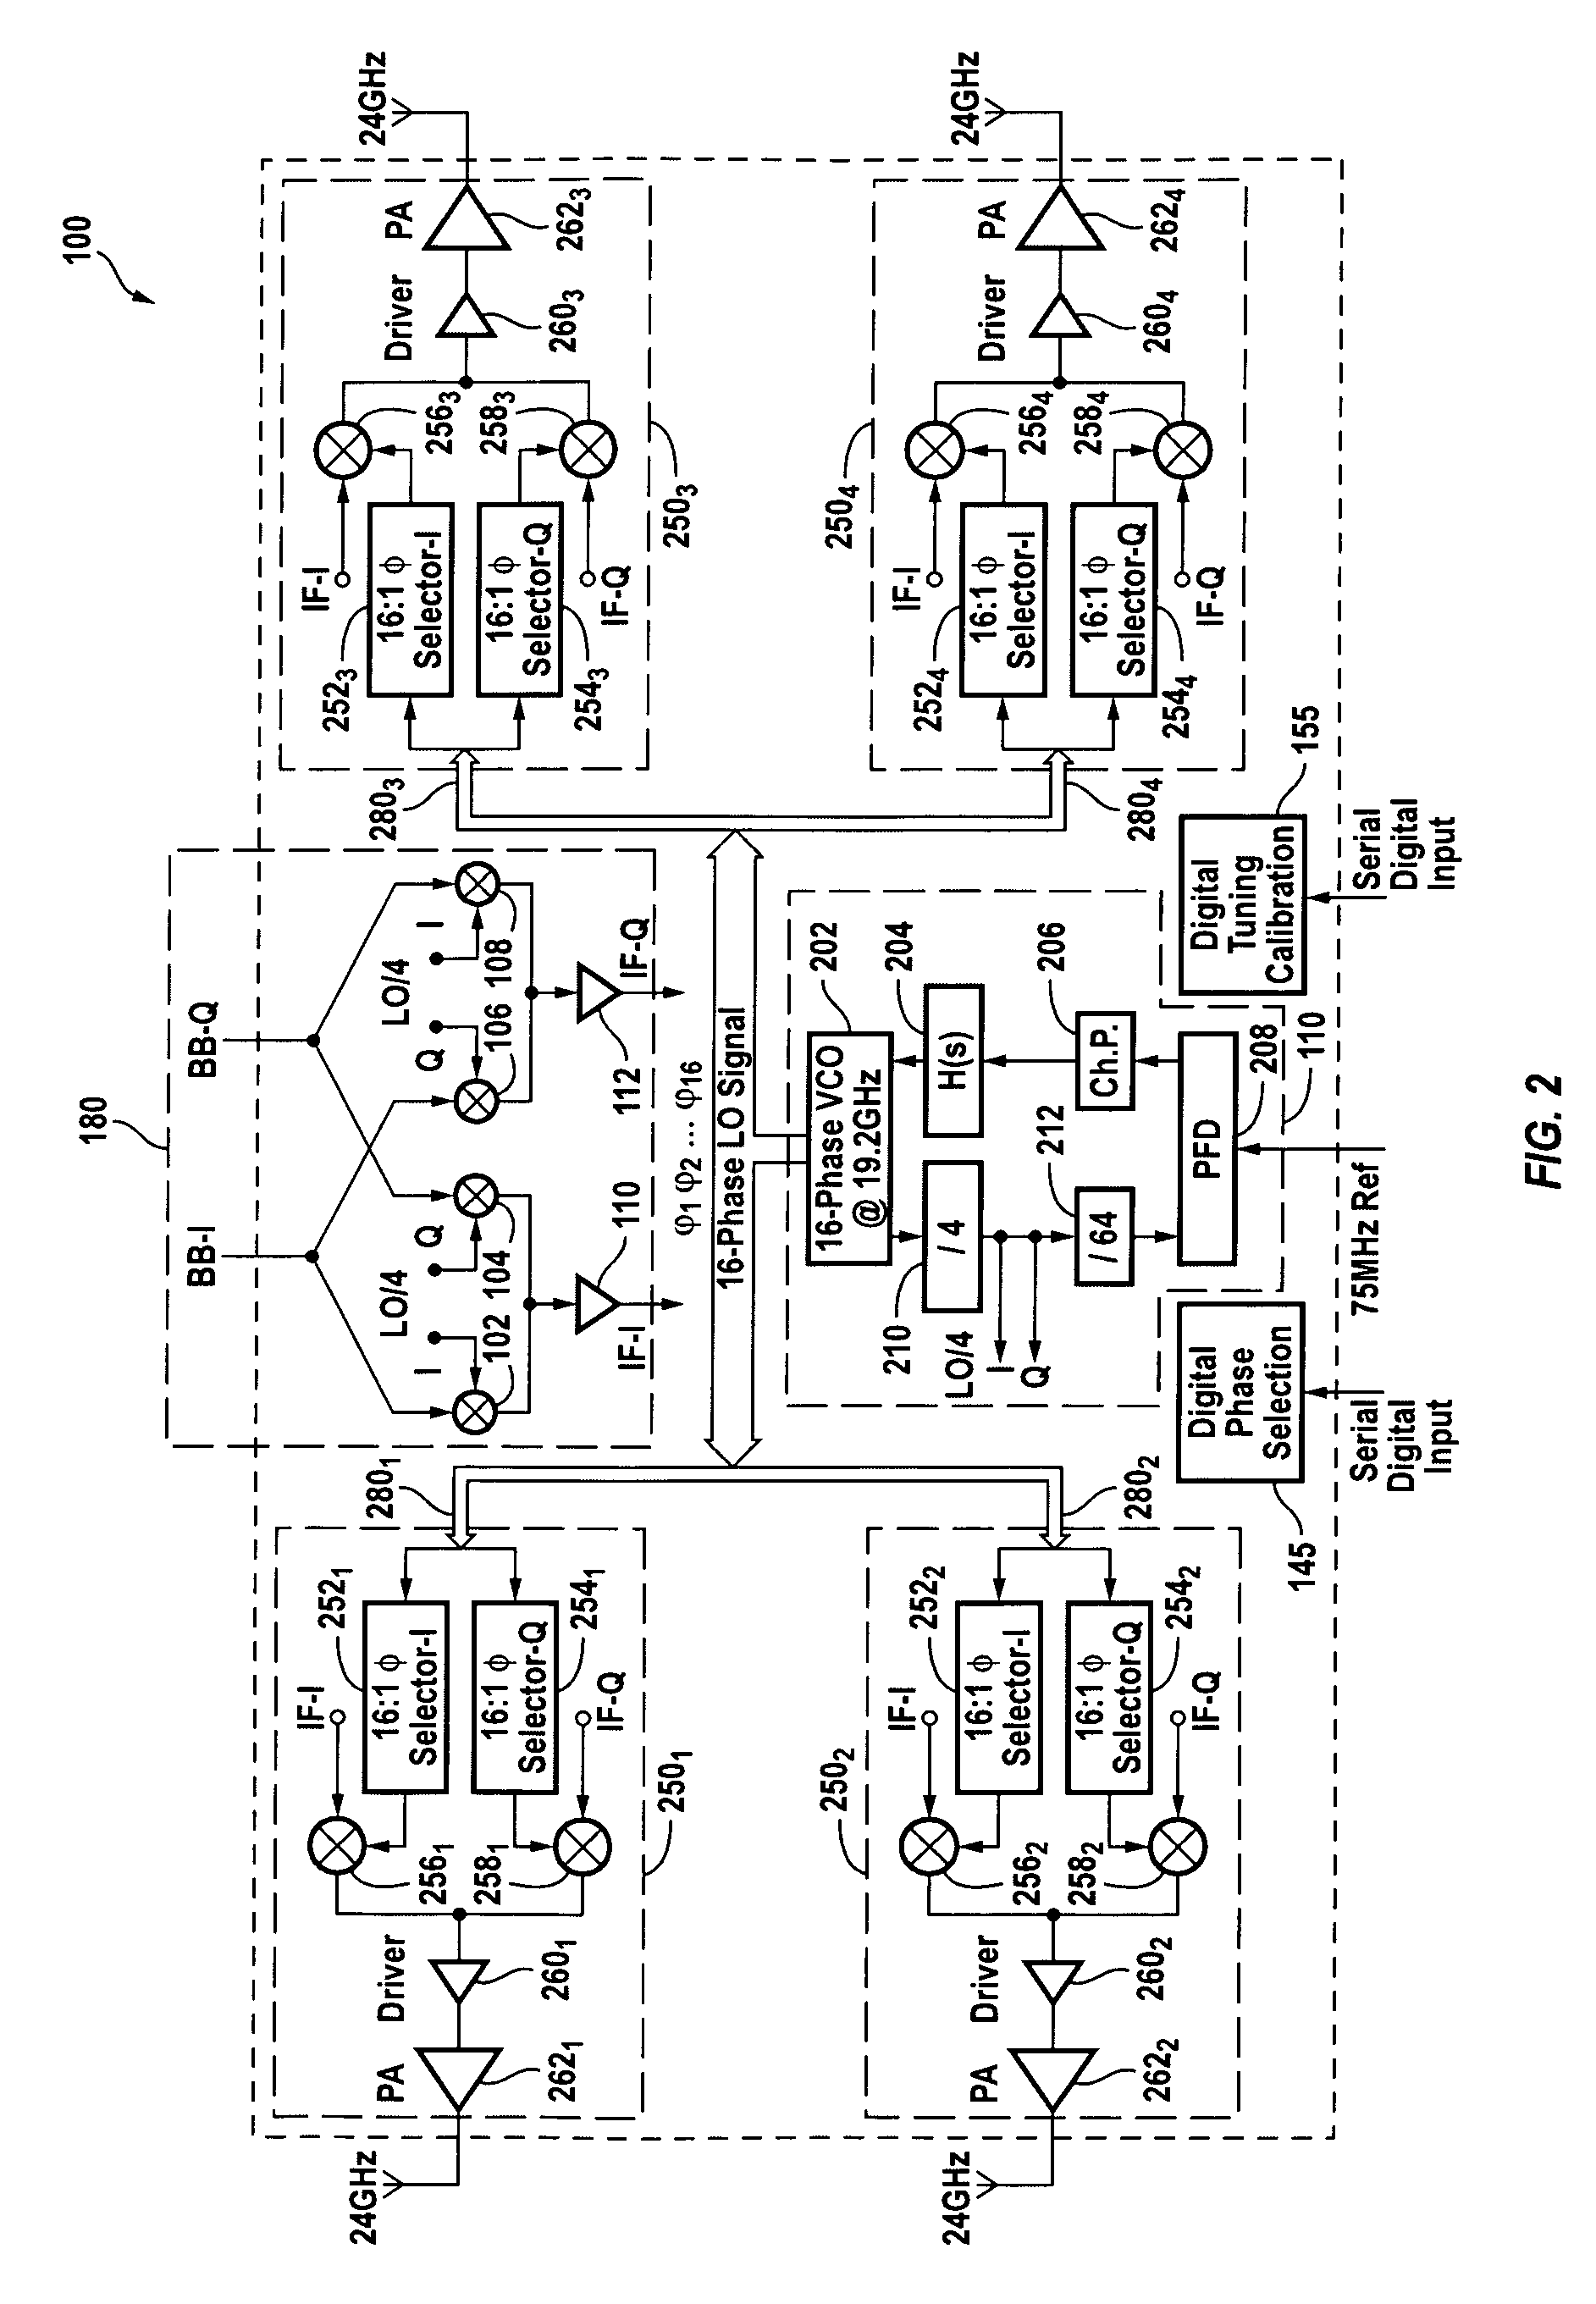 Multi-element phased array transmitter with LO phase shifting and integrated power amplifier